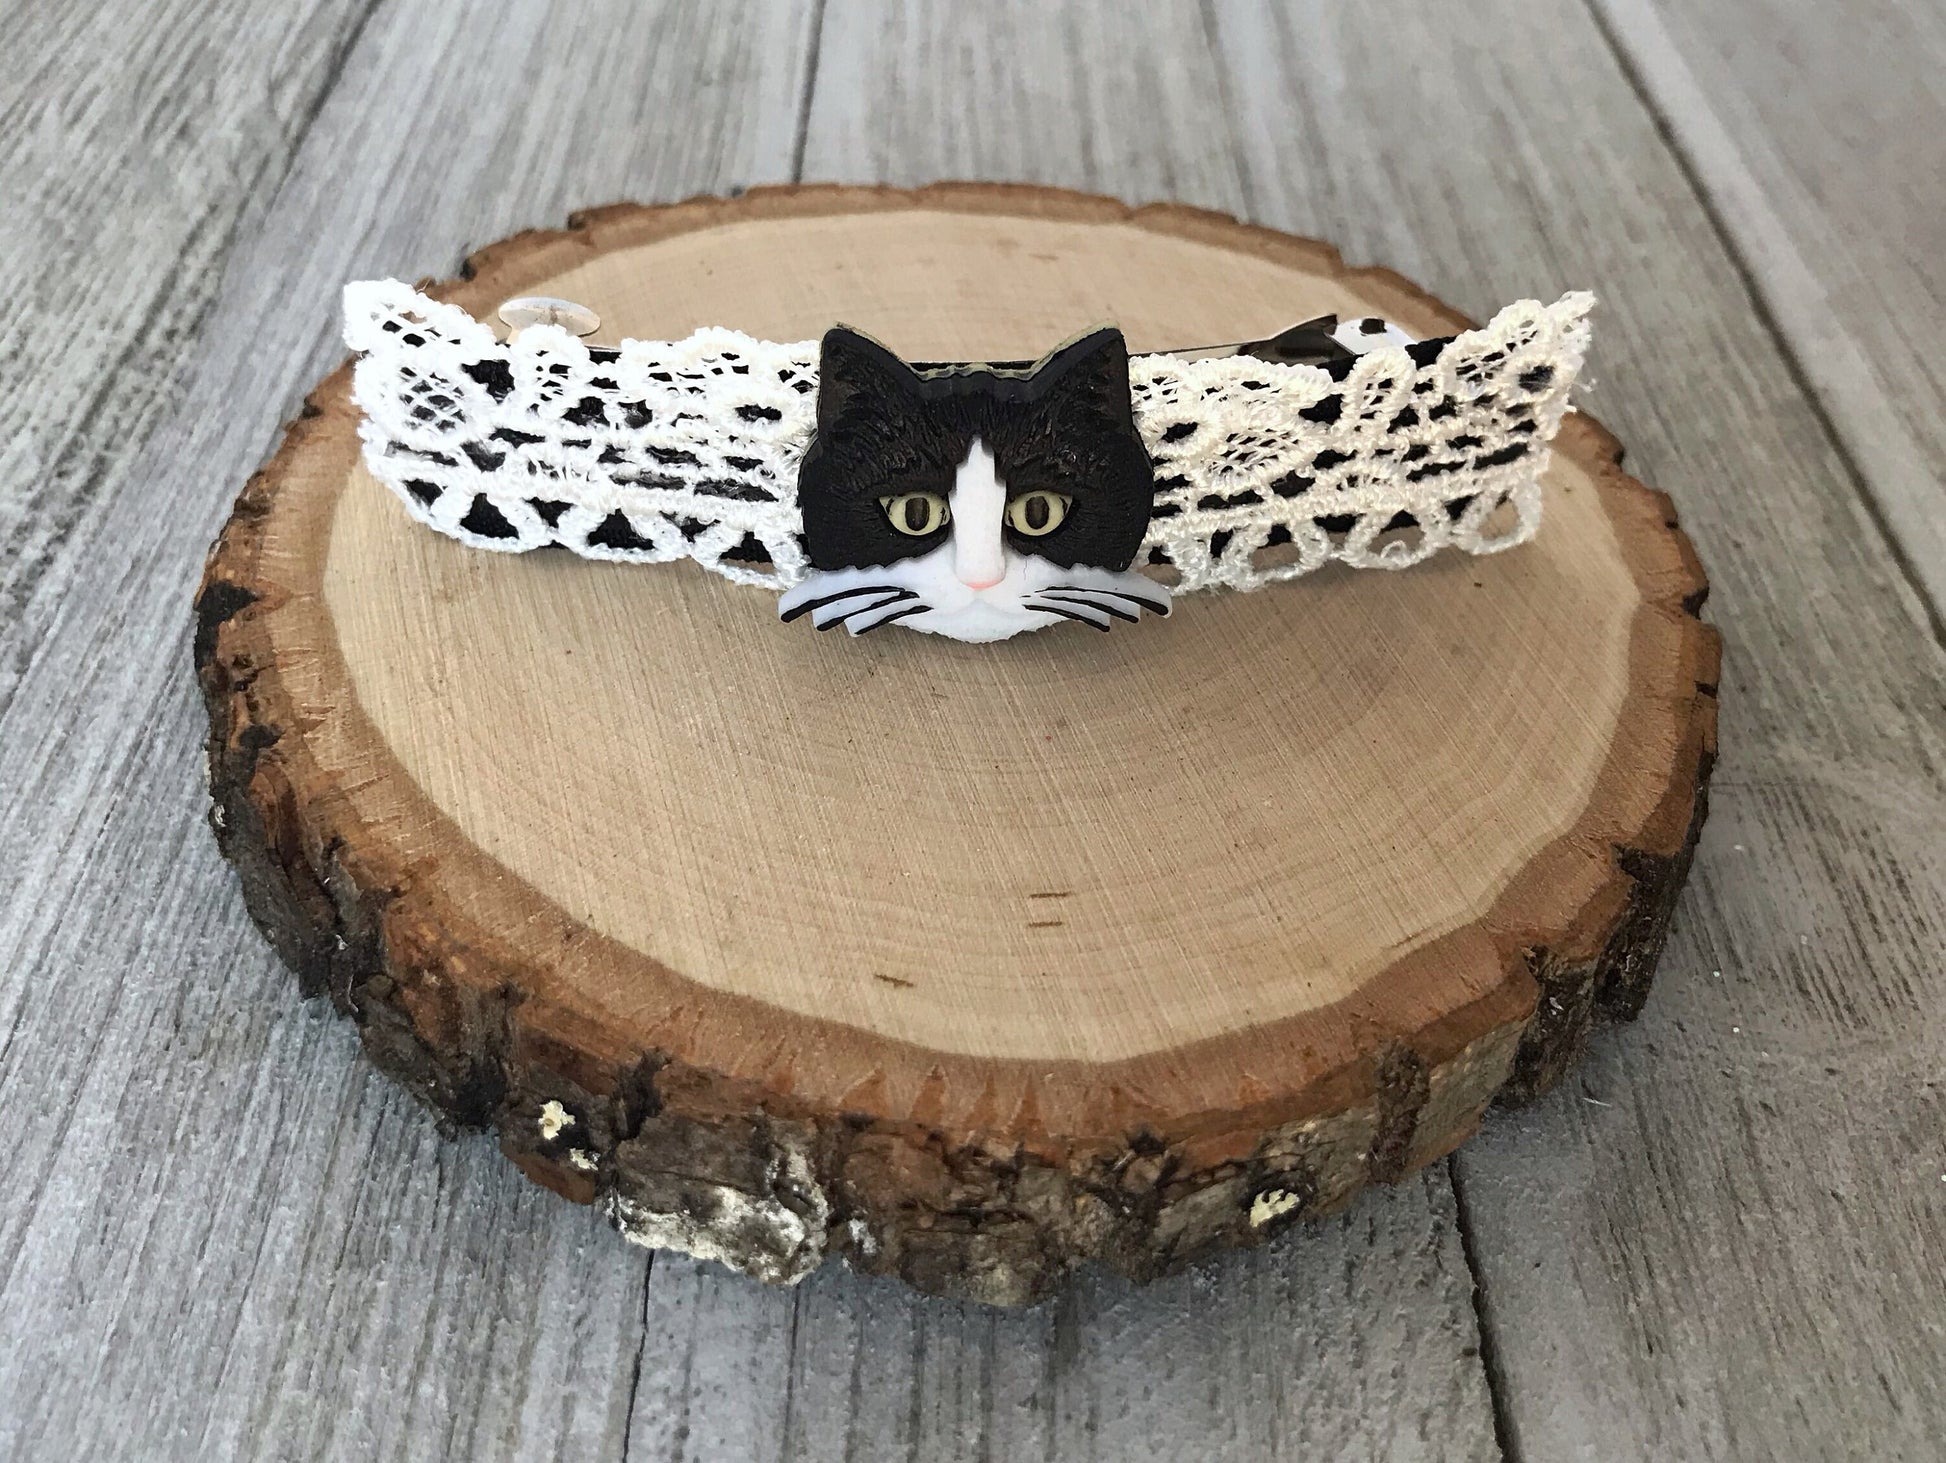 Black & White Cat Hair Barrette with Lace - Charming Feline-Inspired Hair Accessory